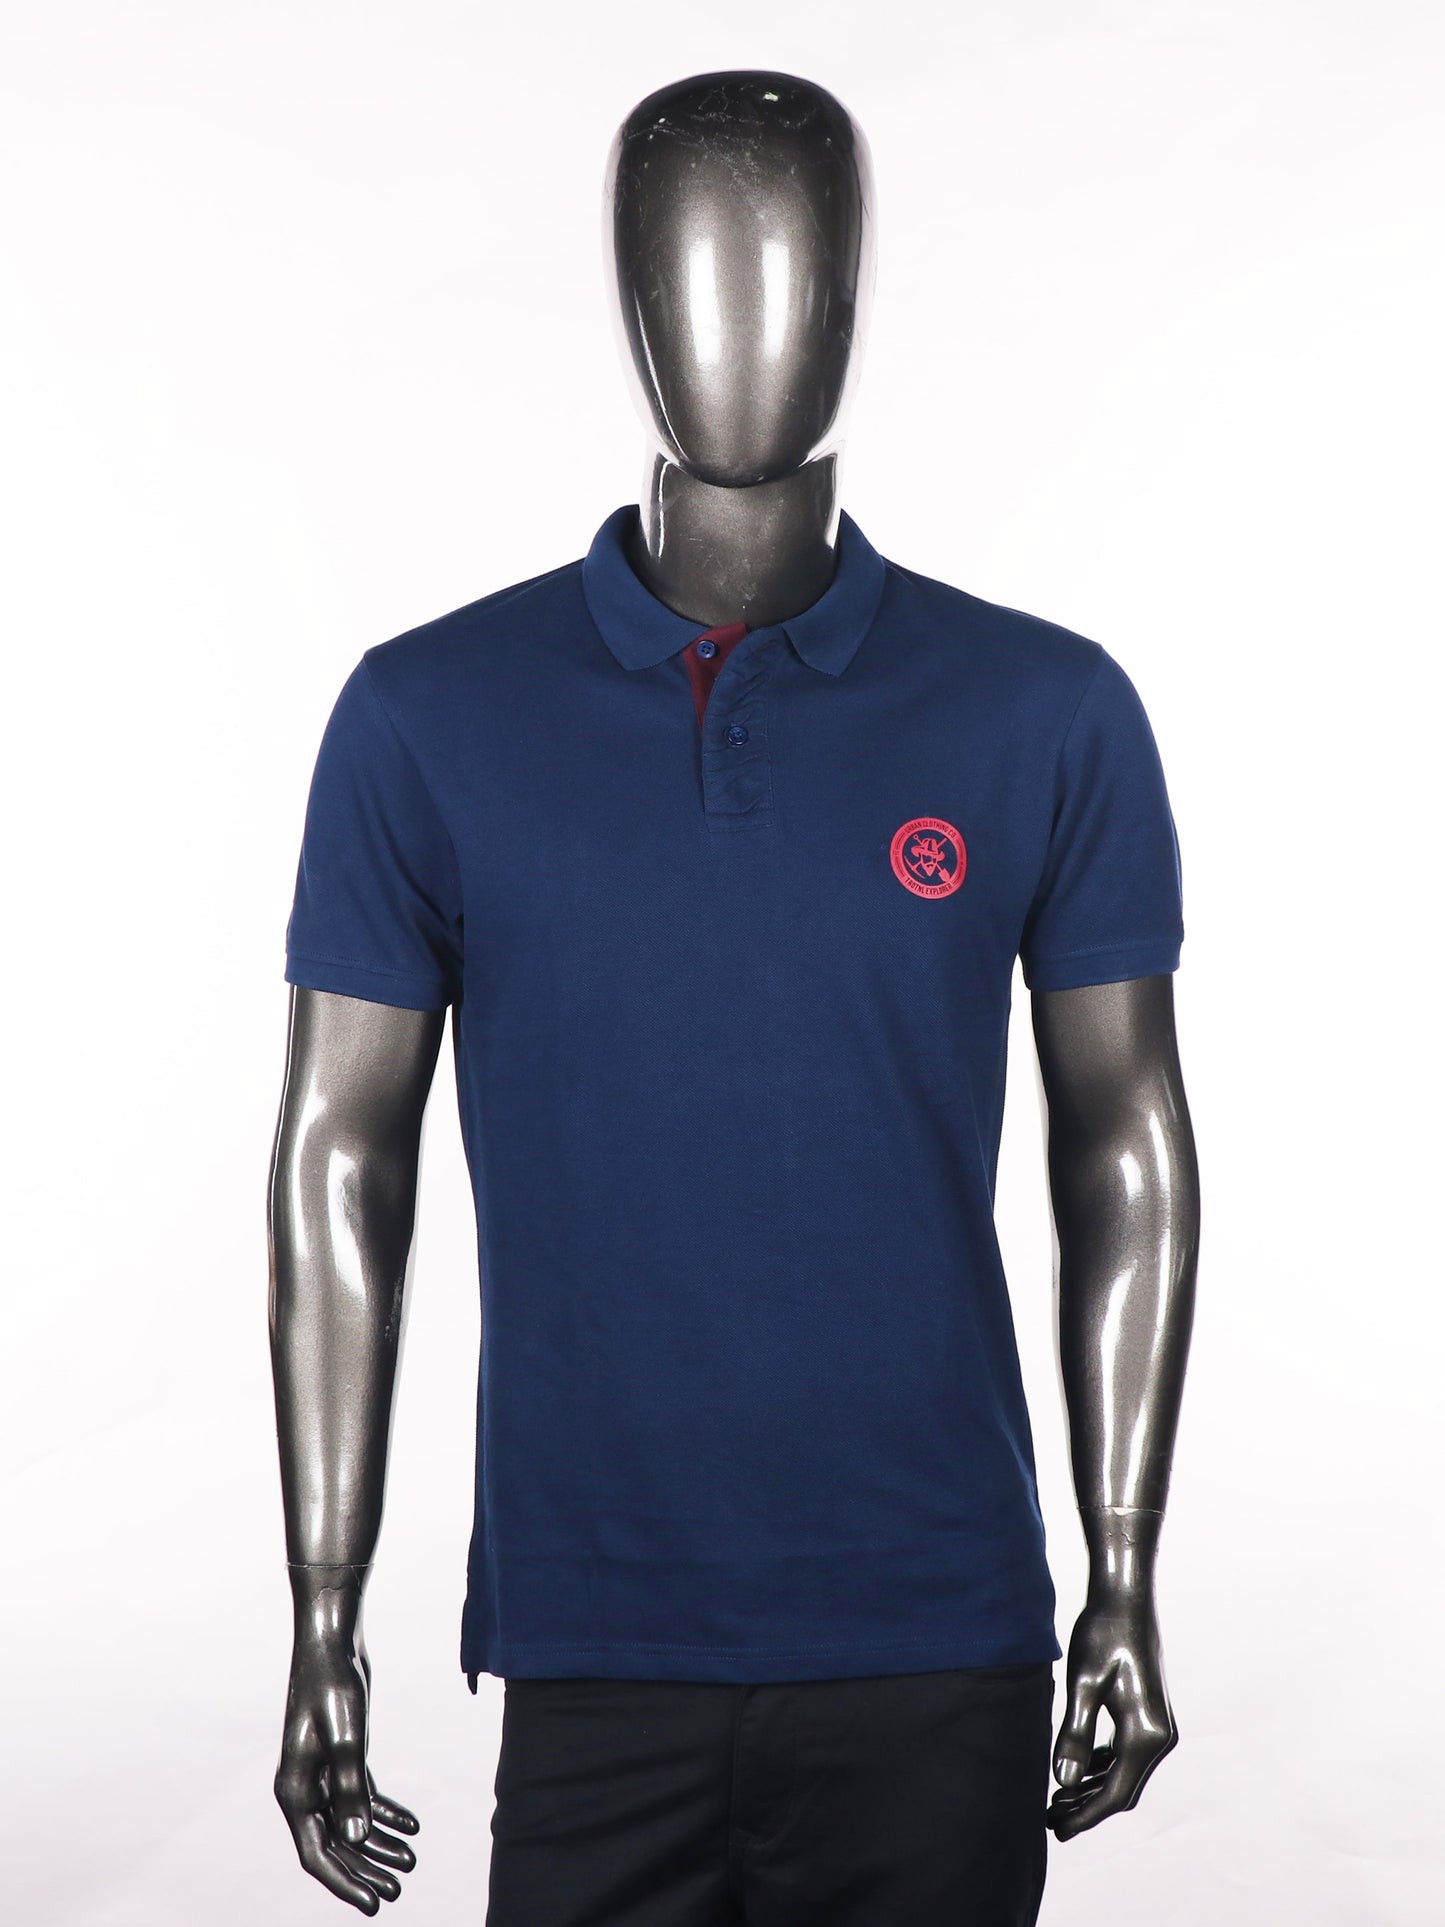 Slim Fit Navy Blue Polo T-Shirt in pique fabric